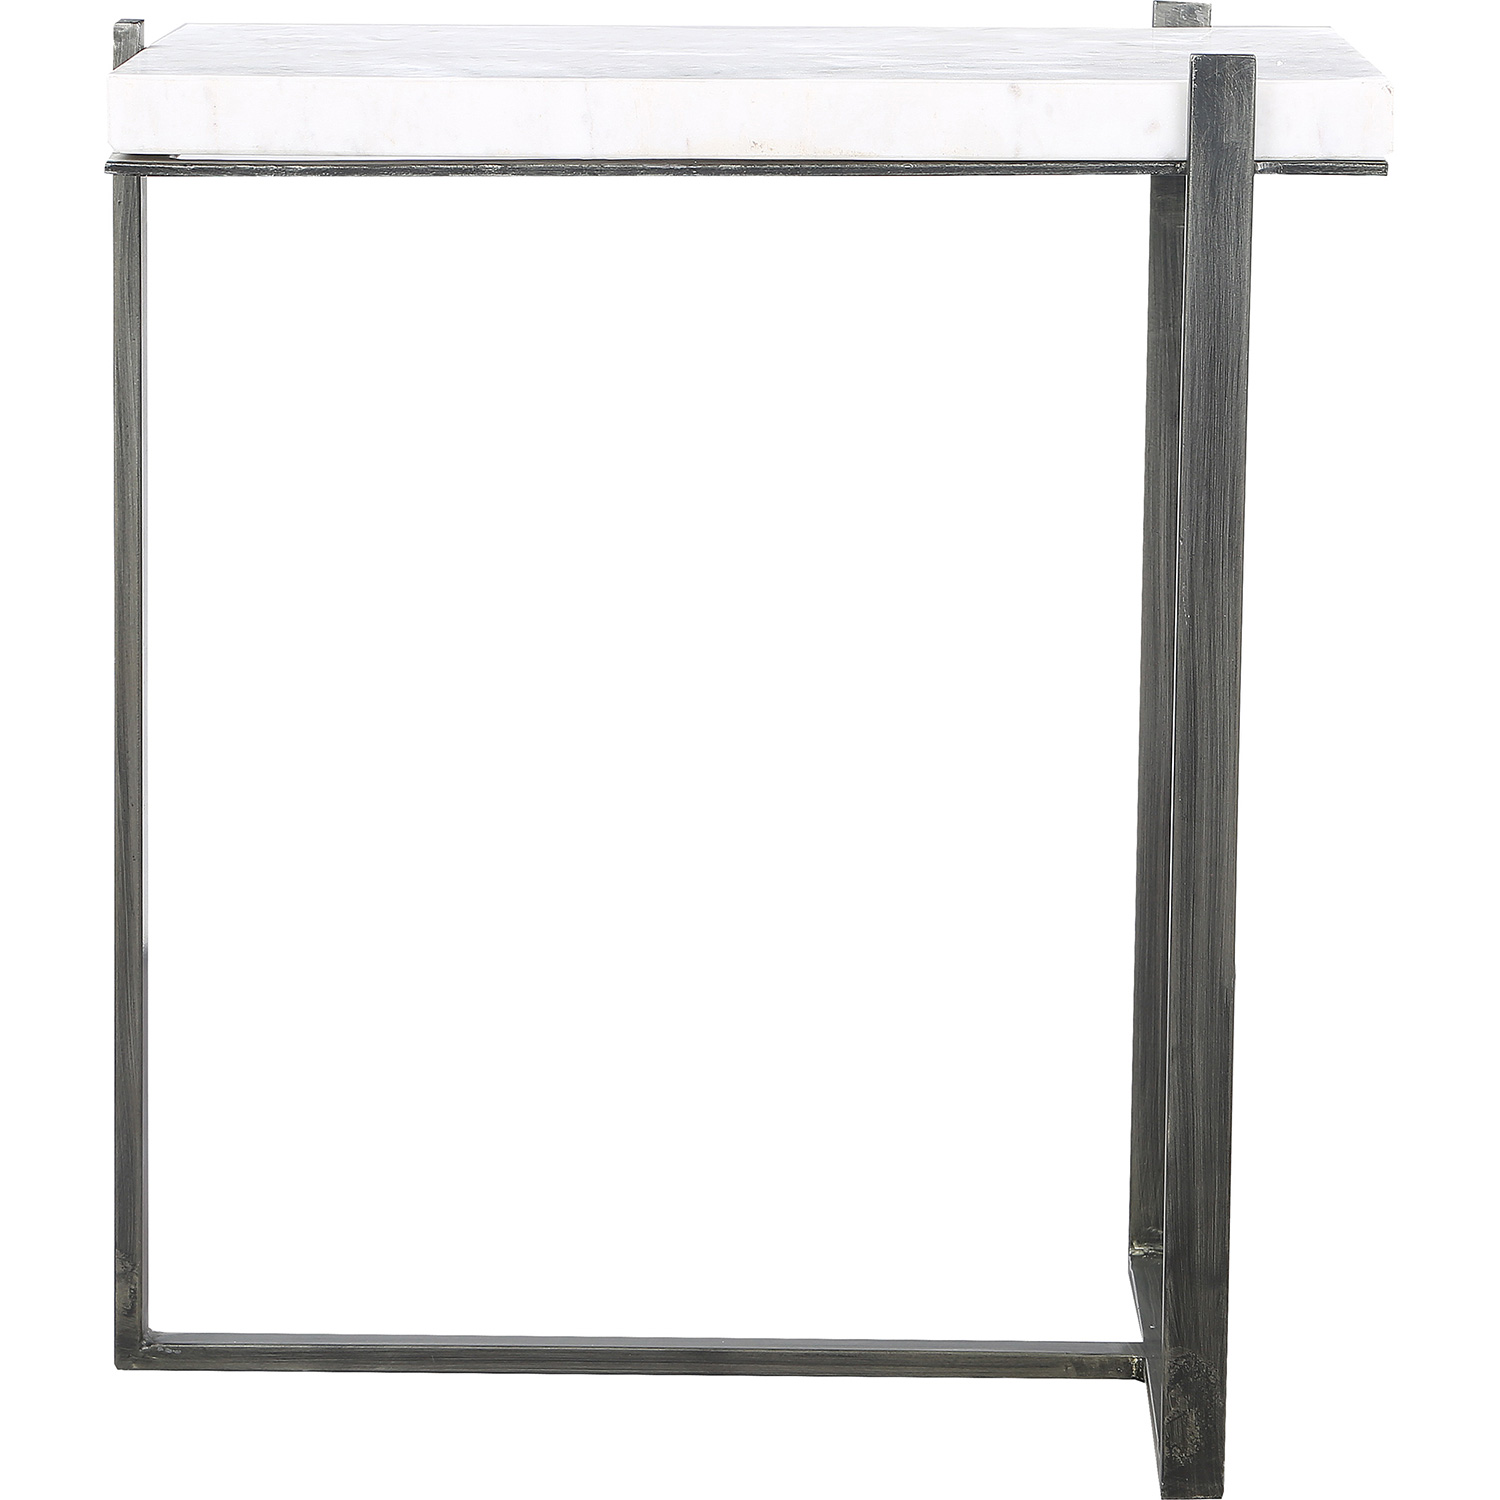 Ren-Wil Hyder Outdoor Accent Table - White Marble/Brush Gray